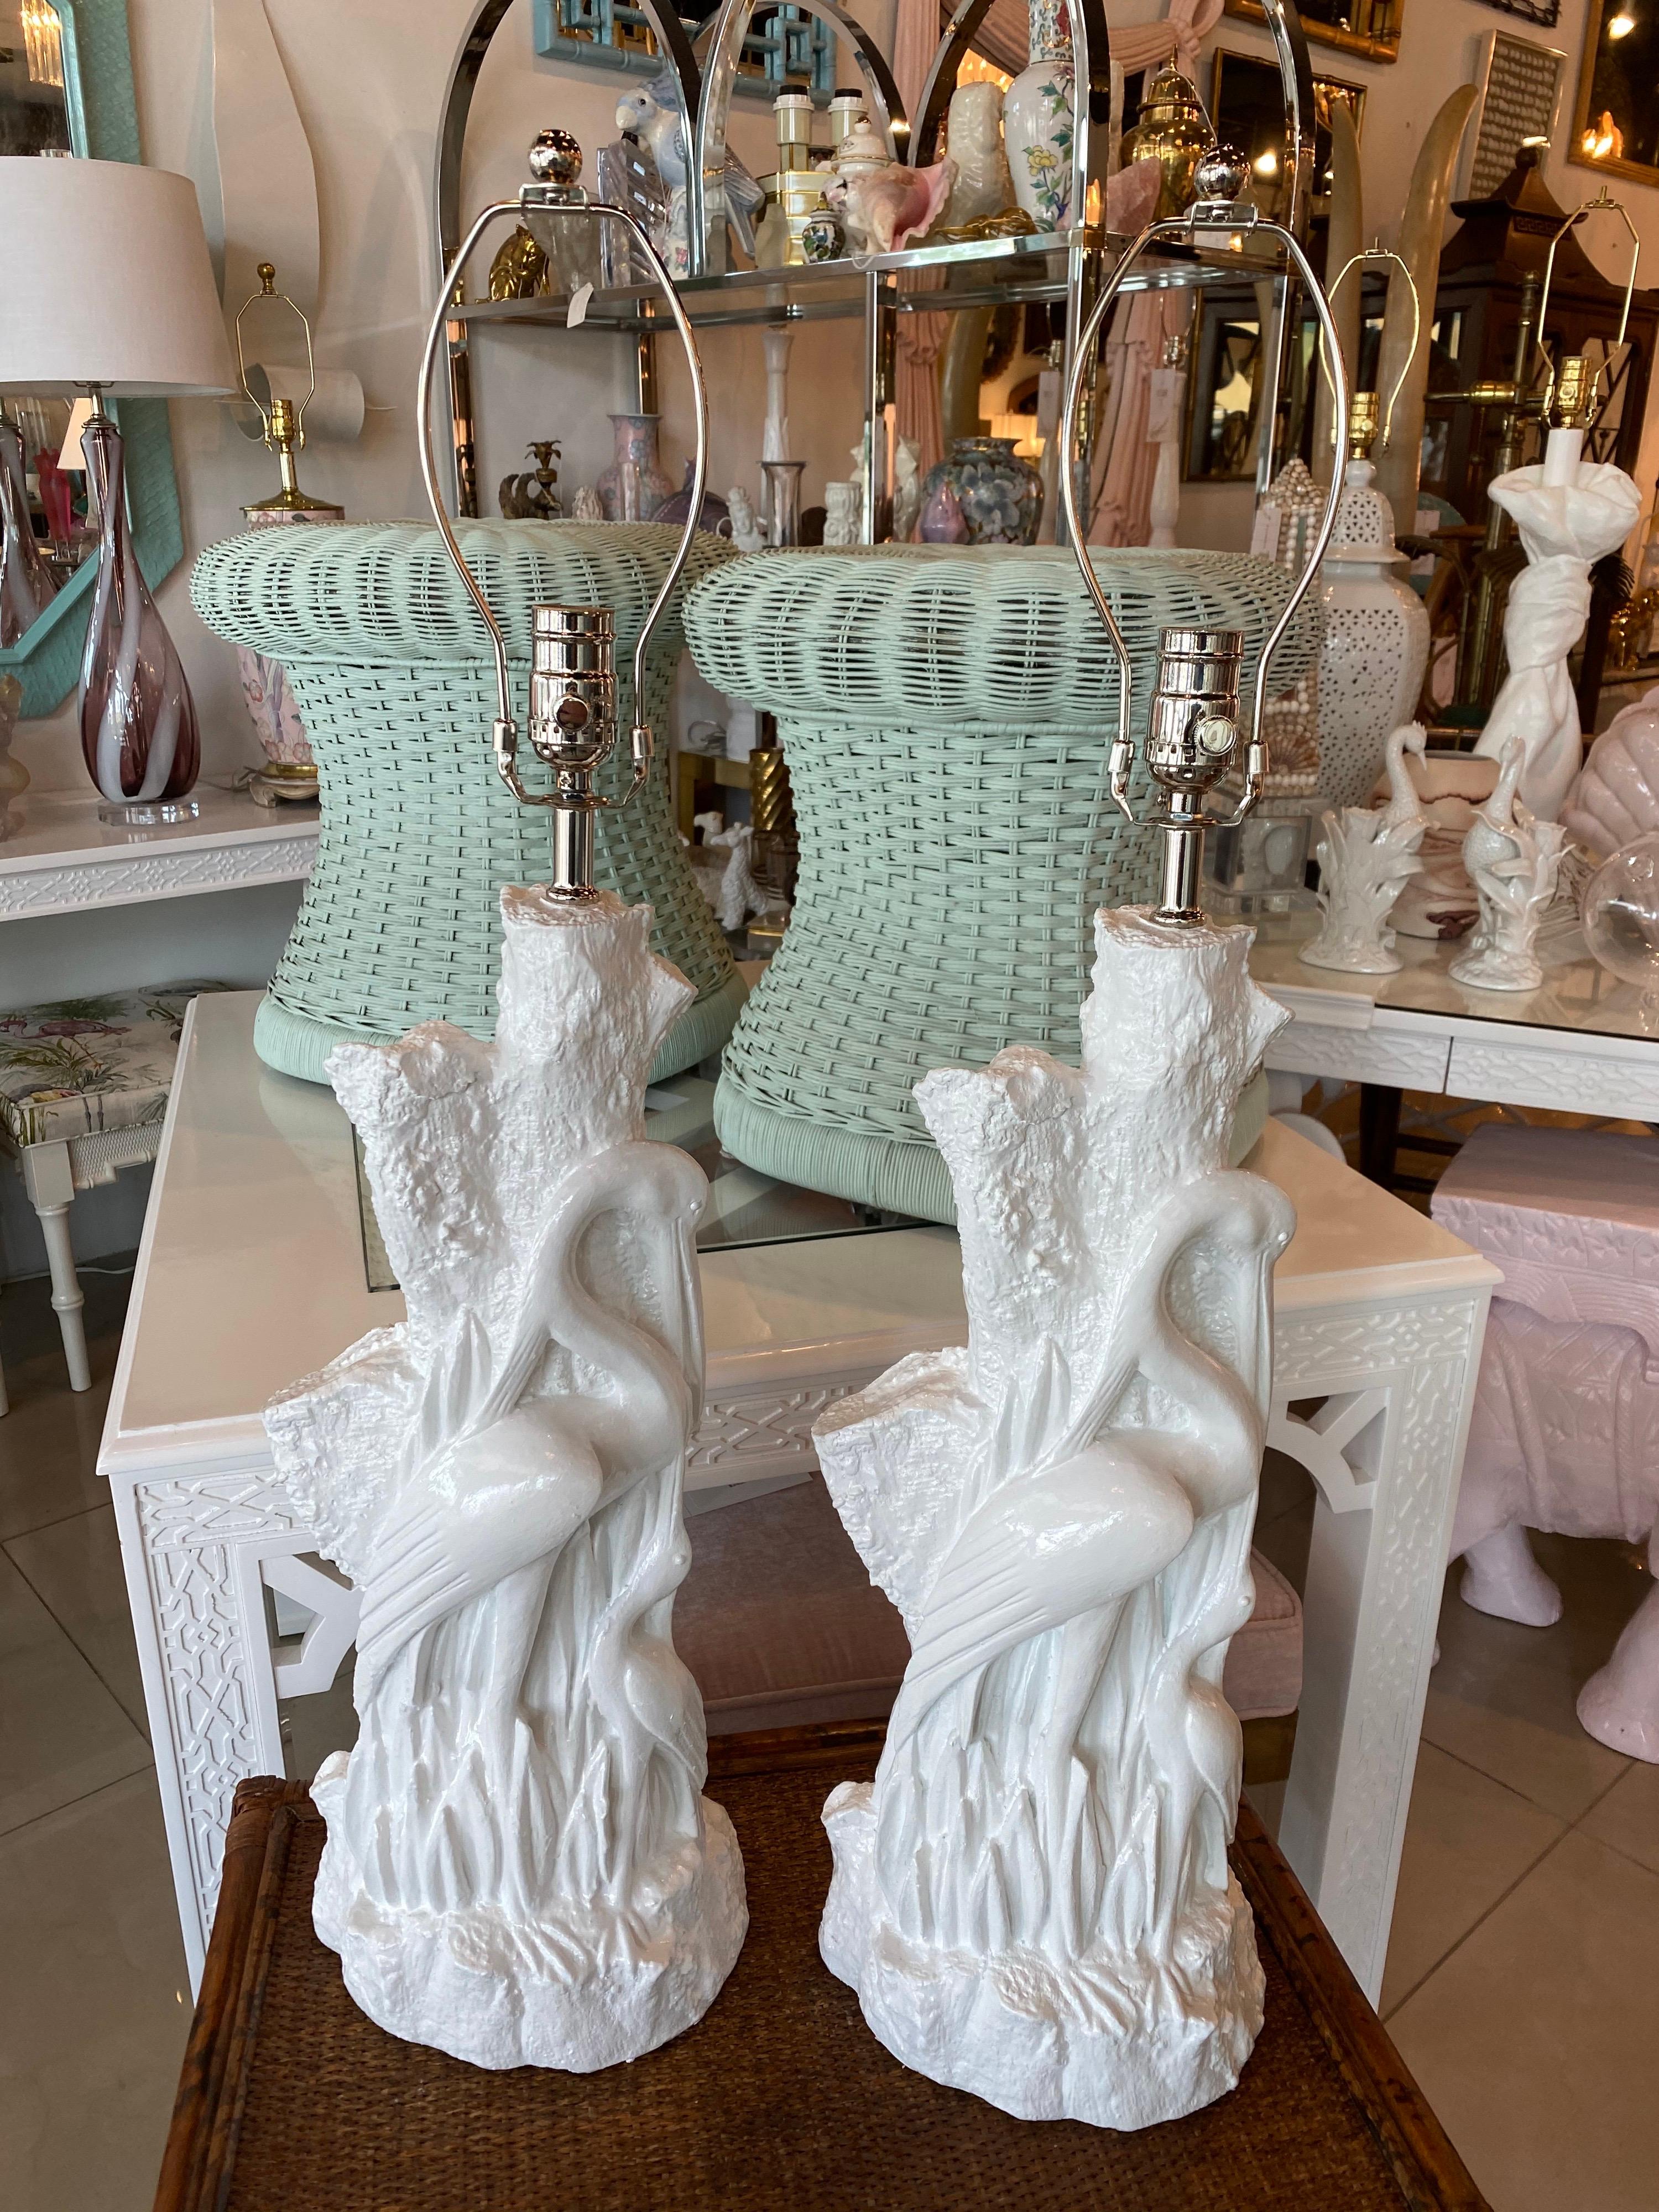 Wonderful pair of vintage plaster bird White Heron table lamps. Completely restored to perfection! Newly wired, all new nickel hardware with 3 way sockets. 
Measures: 31.5 tall to top of finial
25.25 tall to top of socket.